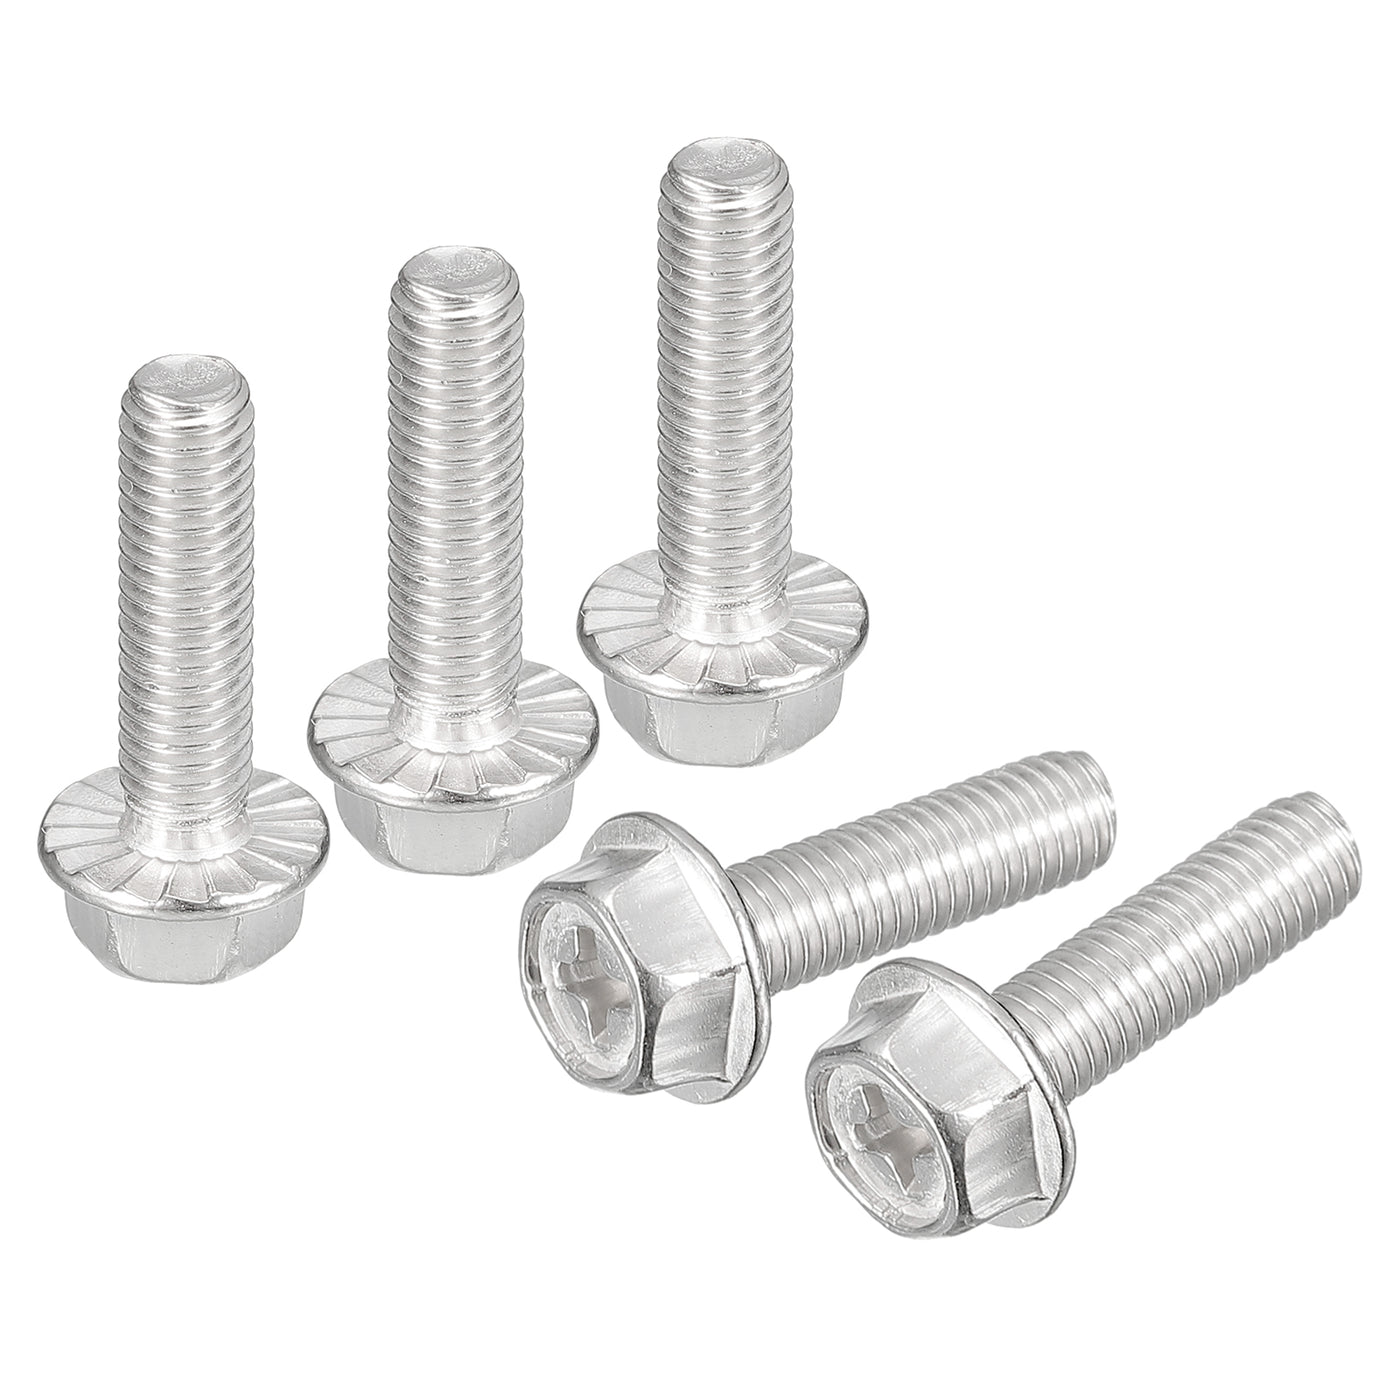 uxcell Uxcell M5x18mm Phillips Hex Head Flange Bolts, 25pcs 304 Stainless Steel Screws